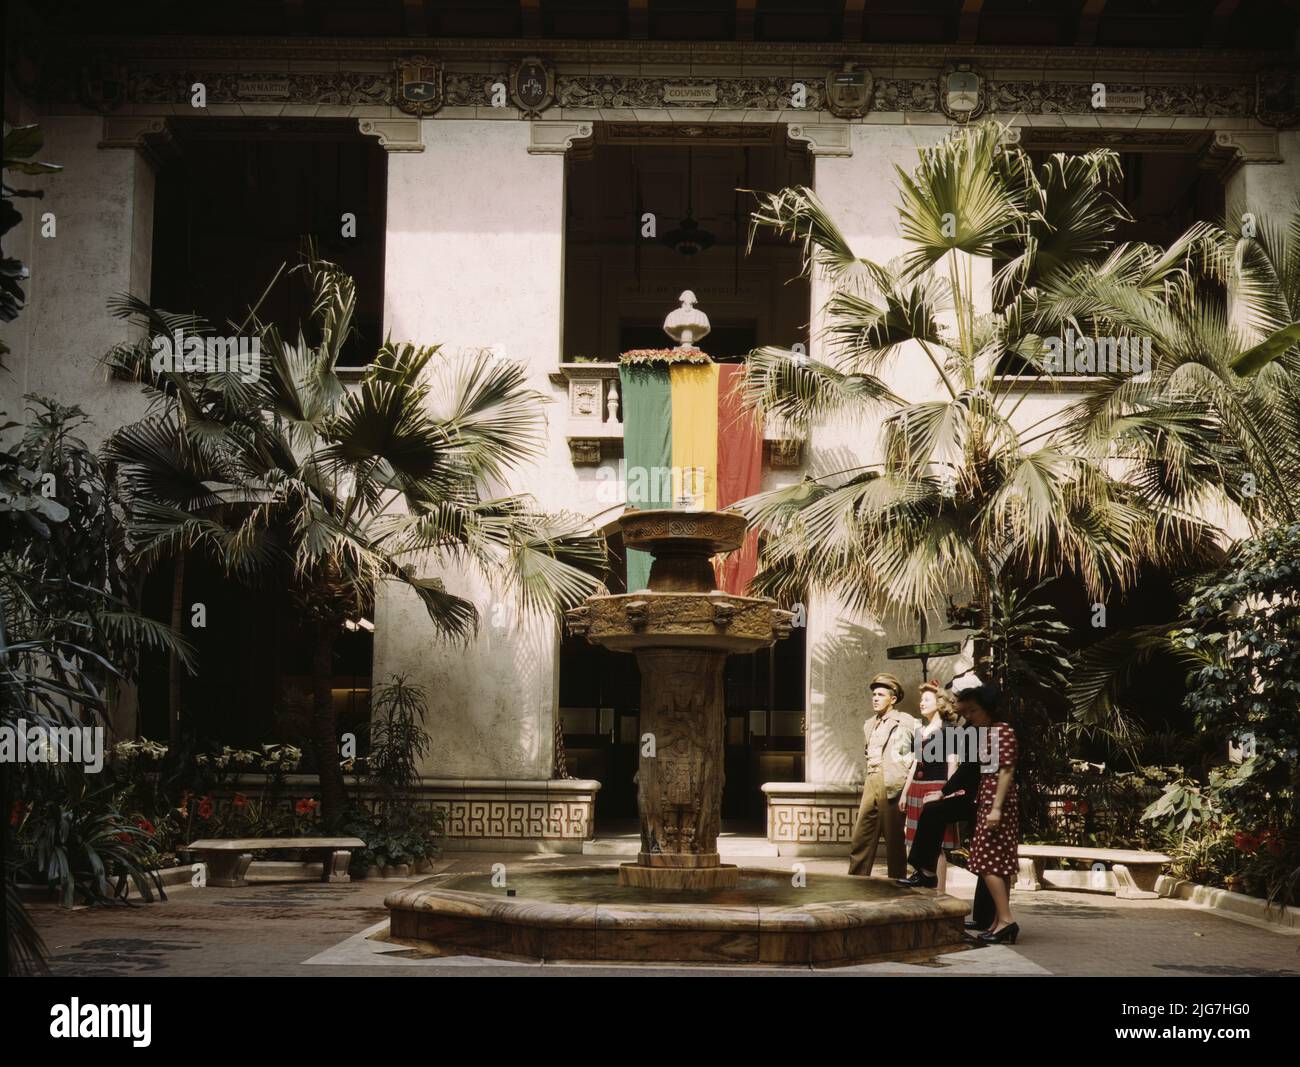 Courtyard of the Pan American Building, Washington, D.C. [Bolivian flag behind fountain. Headquarters of the Organization of American States, building designed by Paul P. Cret and Albert Kelsey]. Stock Photo